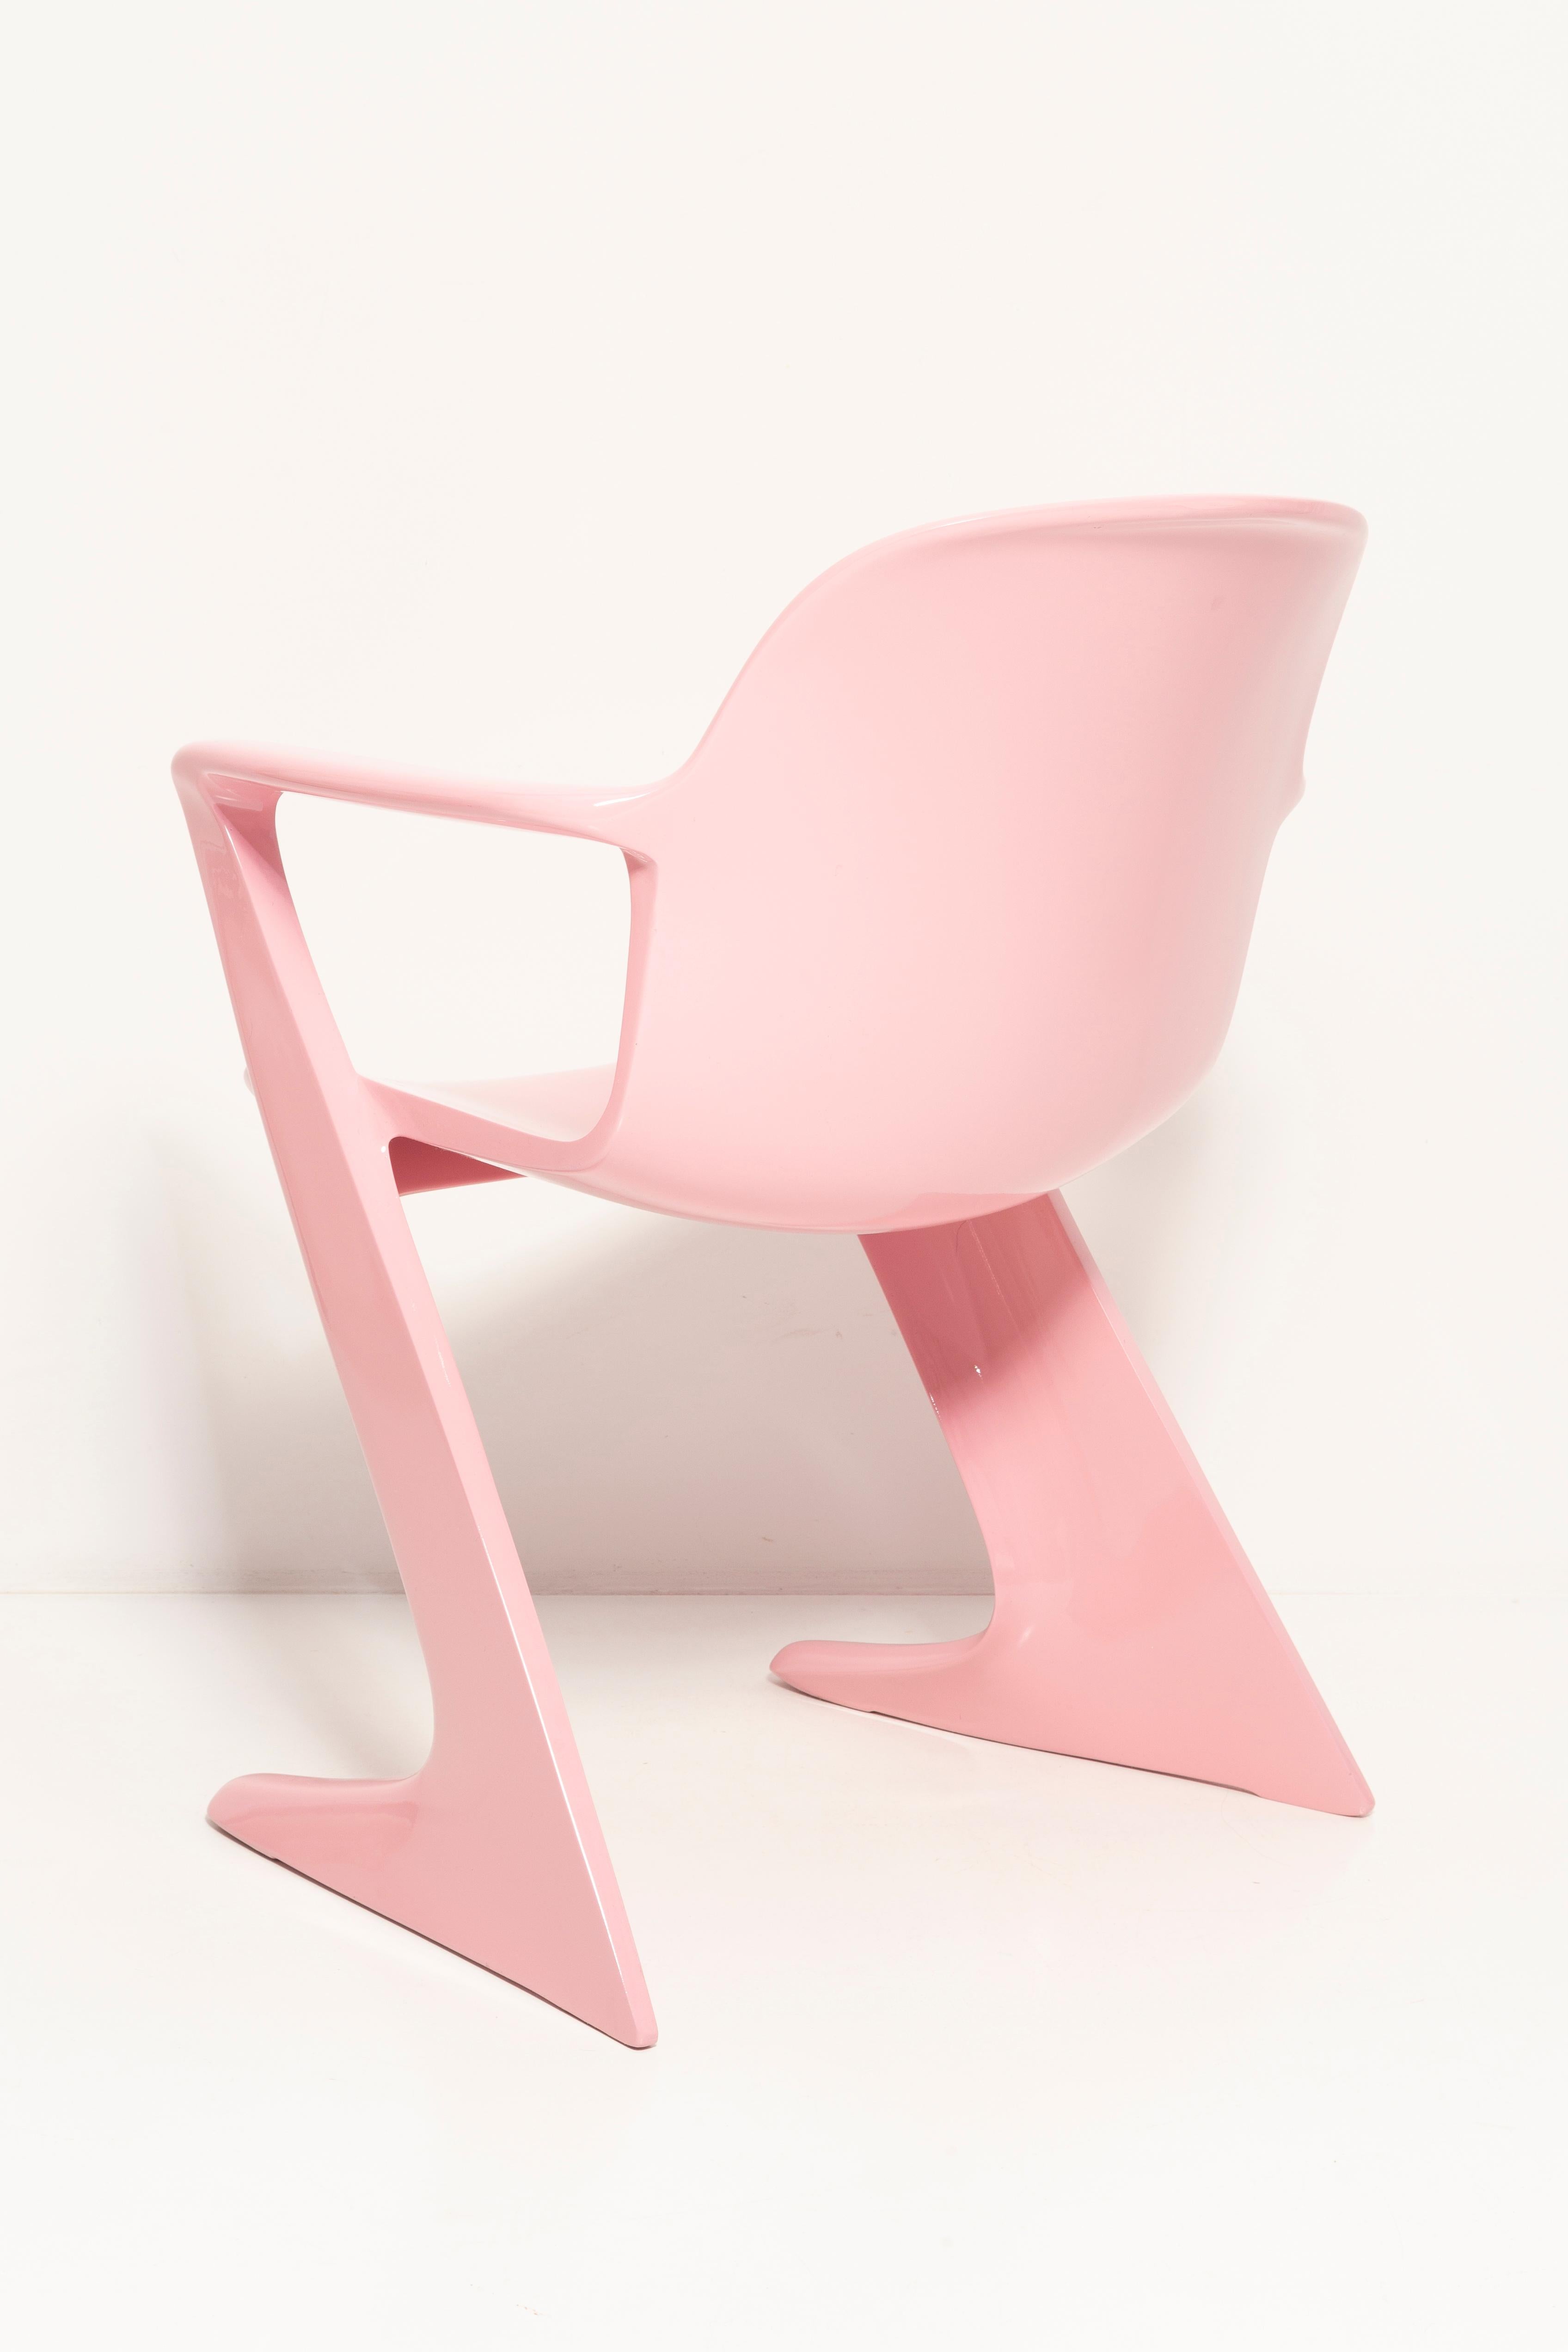 Mid-Century Light Pink Kangaroo Chair Designed by Ernst Moeckl, Germany, 1968 For Sale 6